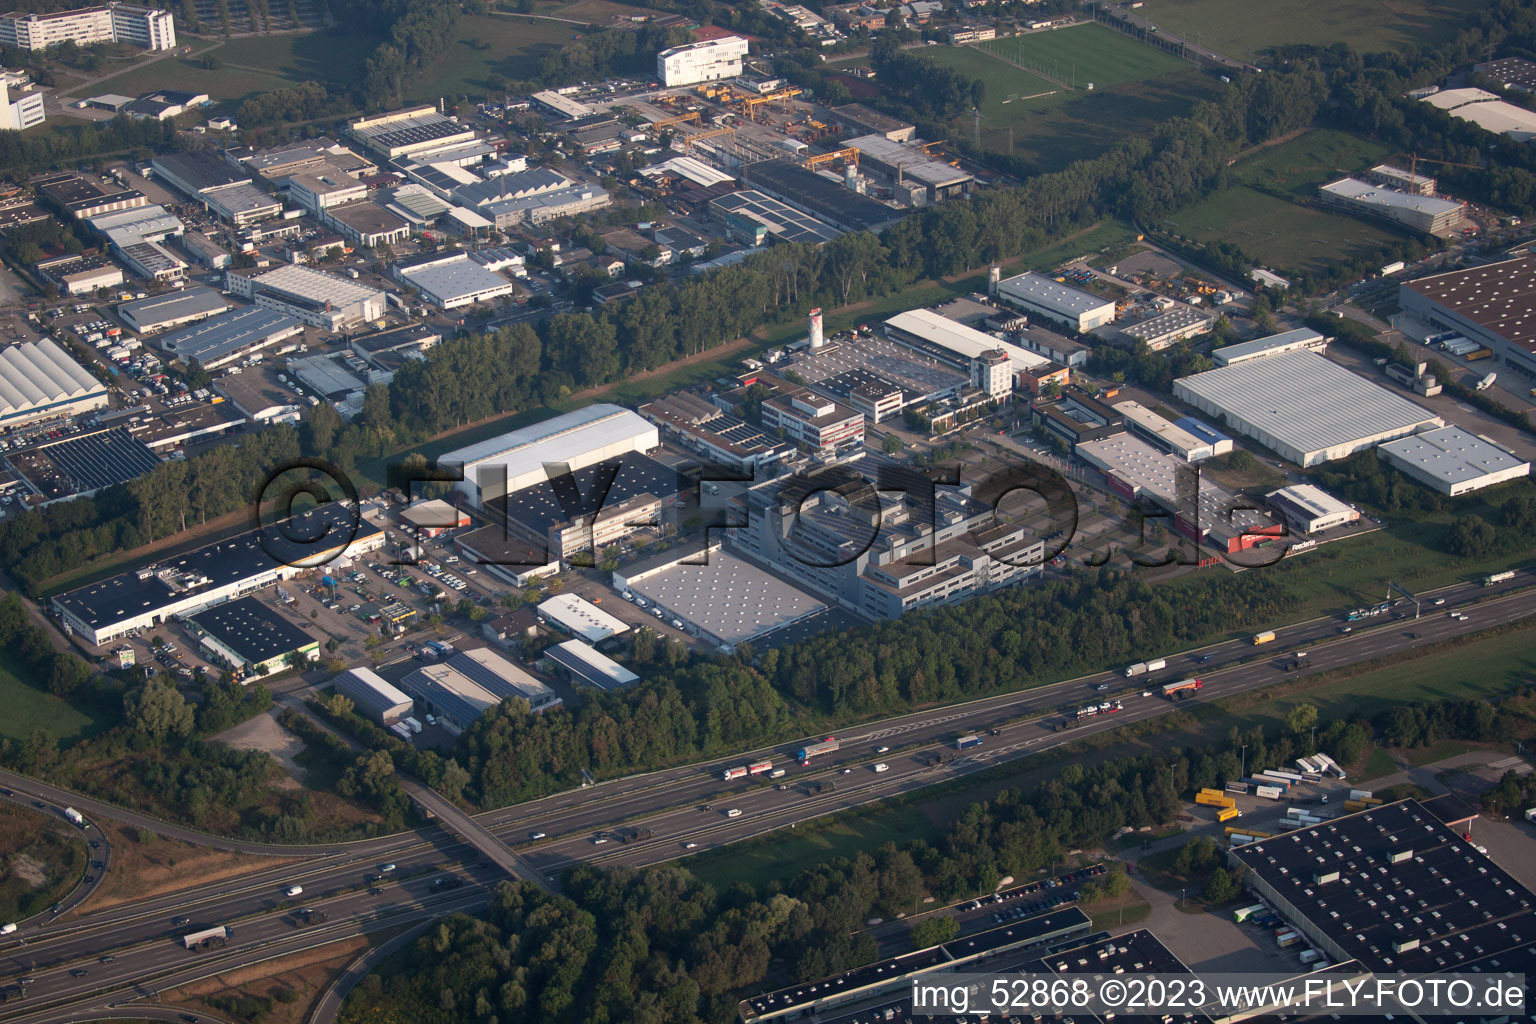 Aerial view of At the Storrenacker in the district Hagsfeld in Karlsruhe in the state Baden-Wuerttemberg, Germany